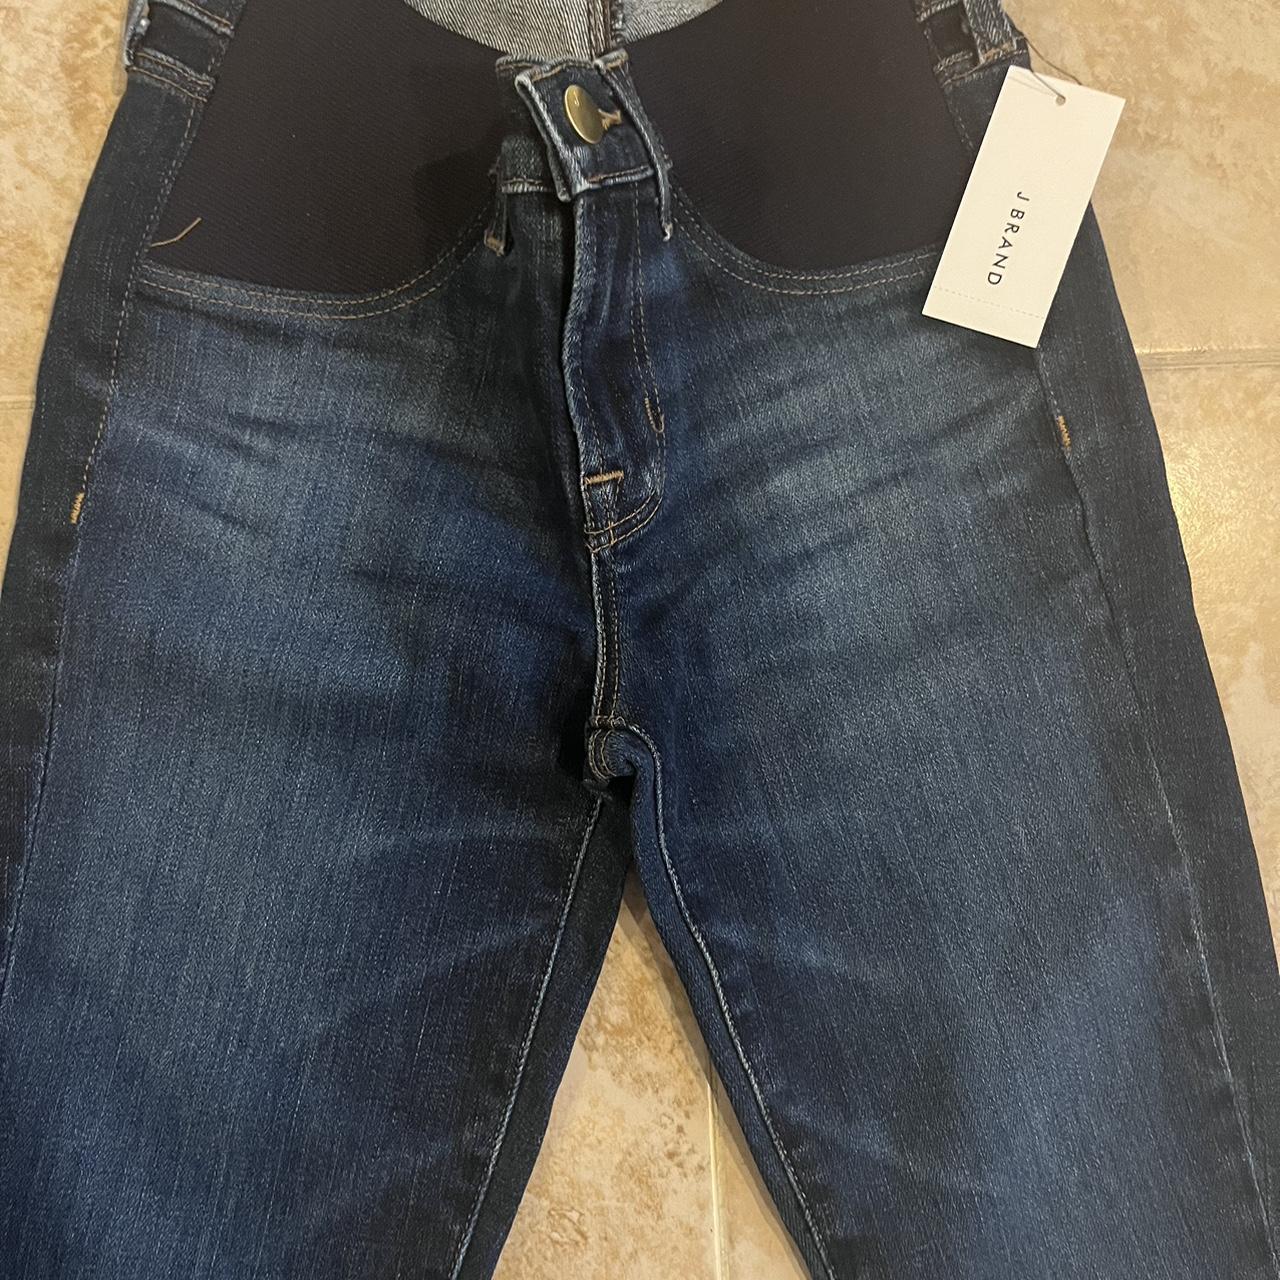 NWT J Brand maternity jeans in blue